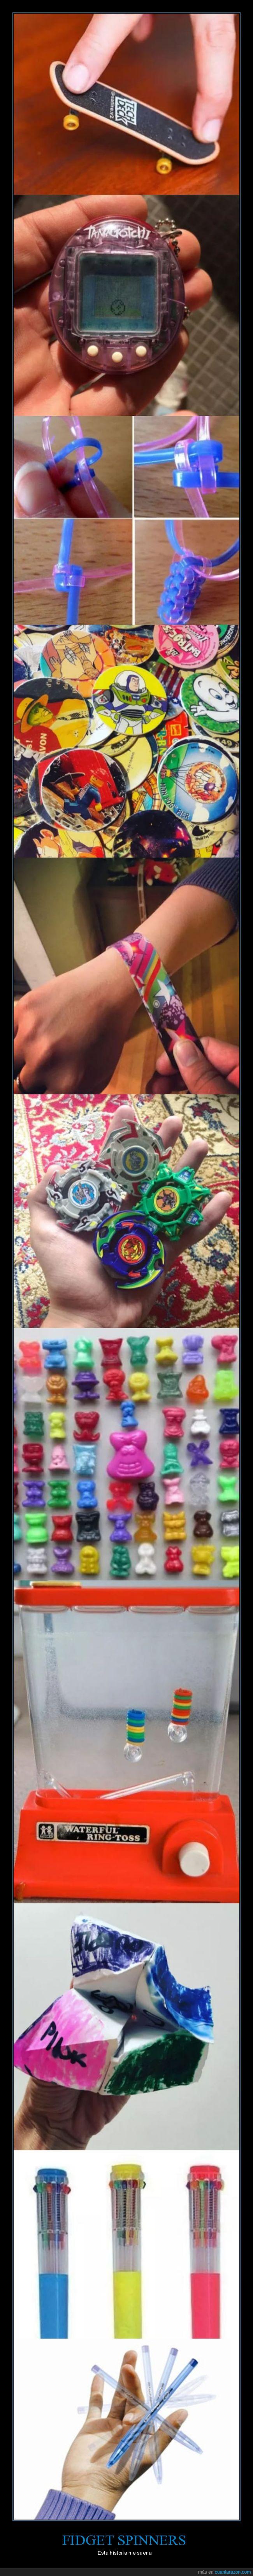 jueguetes,spinners